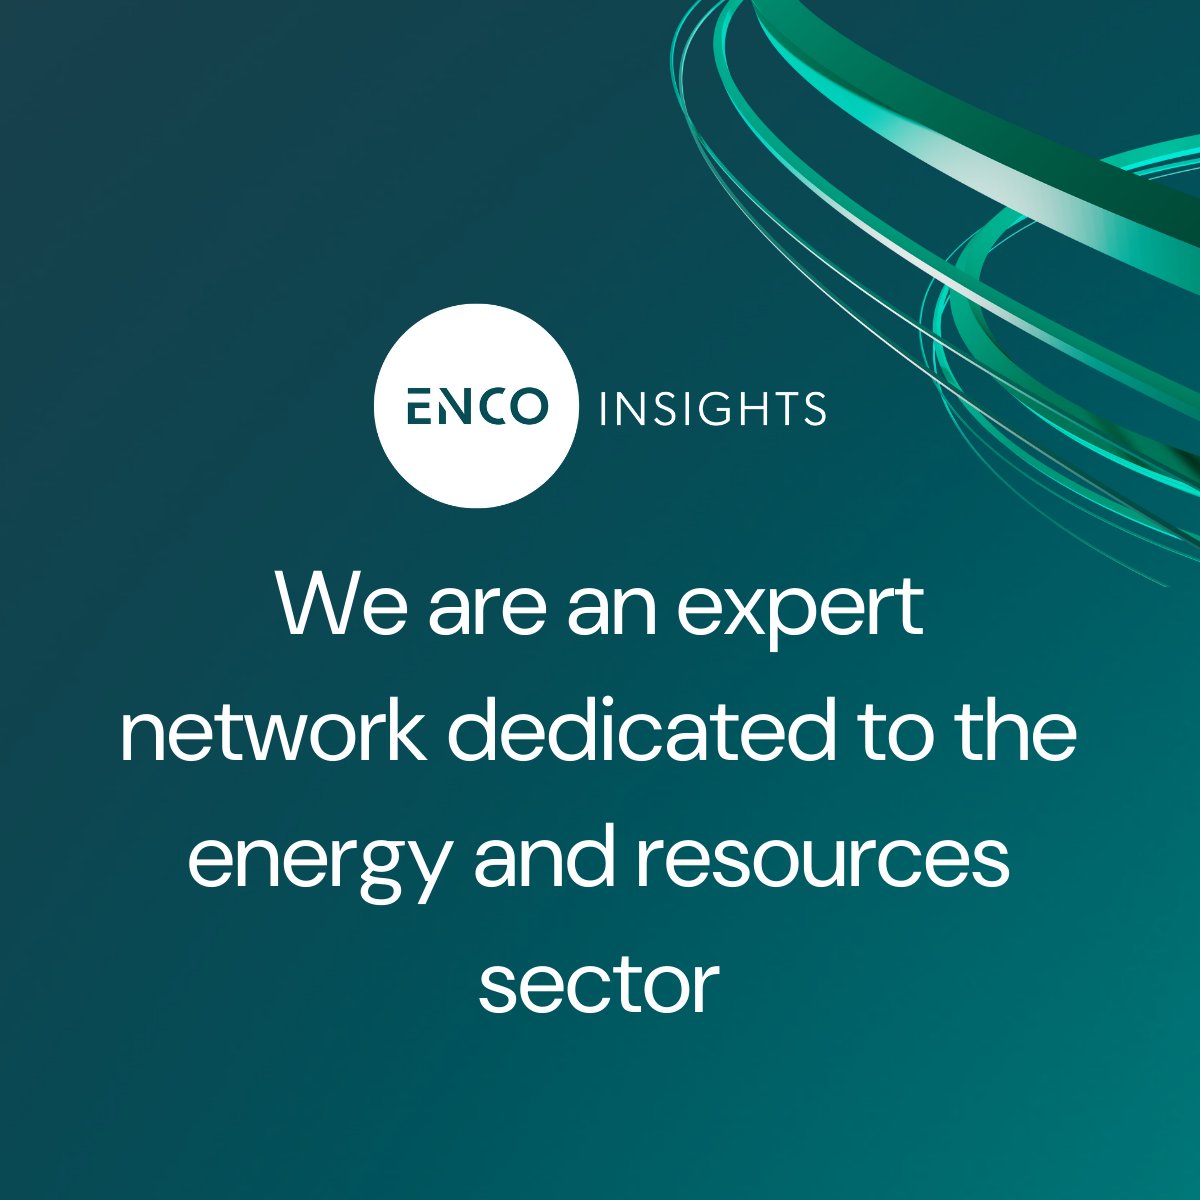 Energy and resources organisations face profound challenges and opportunities.

Enco Insights is a new expert network dedicated to this dynamic sector.

➡ Learn more: encoinsights.com

#expertnetwork #energytransition #commoditiestrading #metalsandmining #naturalresources